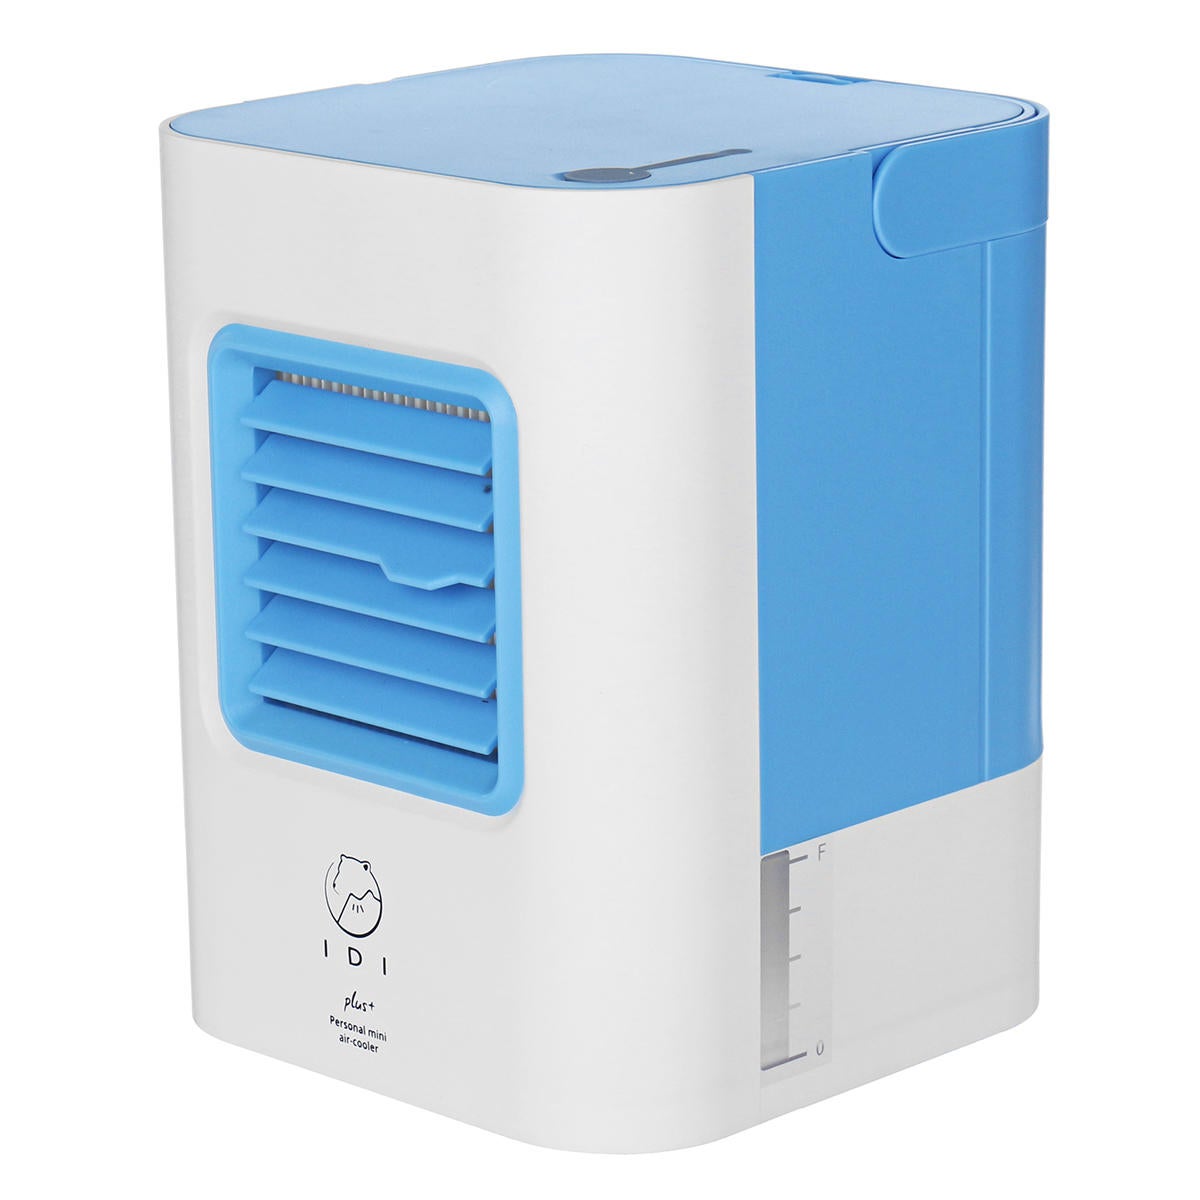 Usb Conditioner Fan Refrigeration Air Personal Space Cooler Air Conditioner Cooling Cooler